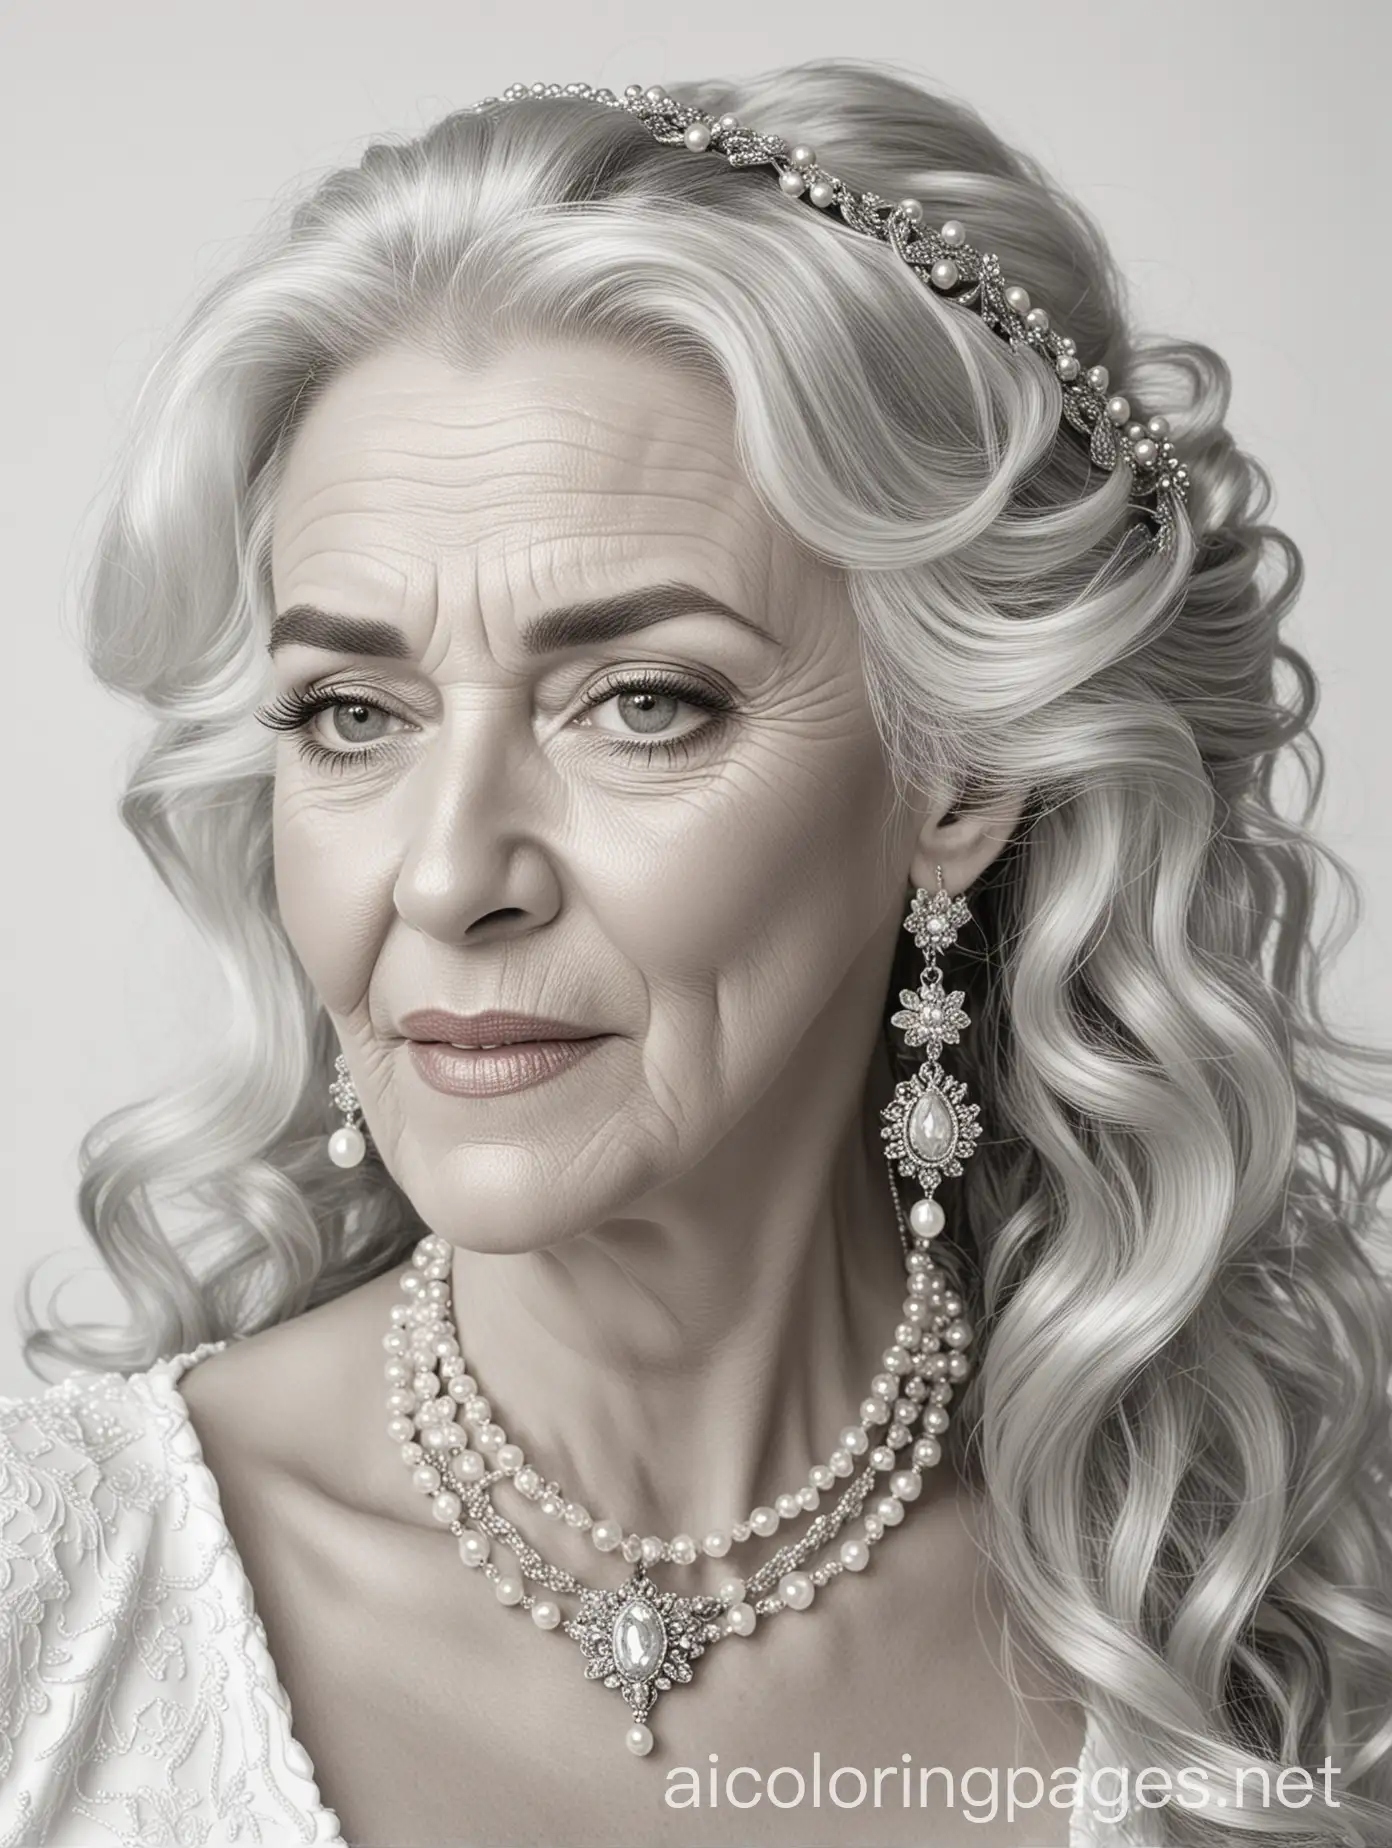 portrait of an older woman touching her face with fancy jewelry and Bridgerton half up half down hairstyle with long wavey hair and pearls and a fancy dress, Coloring Page, black and white, line art, white background, Simplicity, Ample White Space. The background of the coloring page is plain white to make it easy for young children to color within the lines. The outlines of all the subjects are easy to distinguish, making it simple for kids to color without too much difficulty